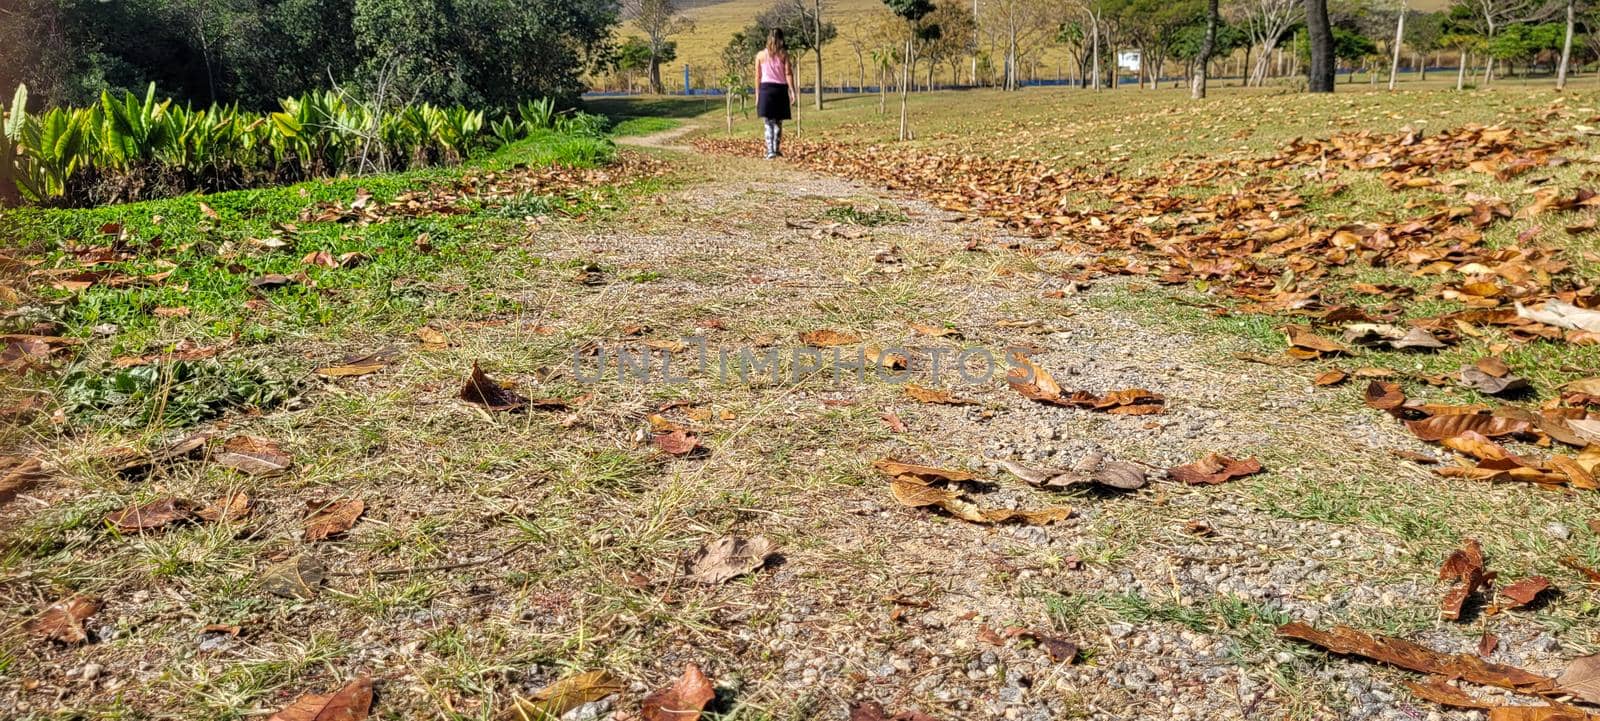 dry autumn winter leaves in a park in the countryside of Brazil